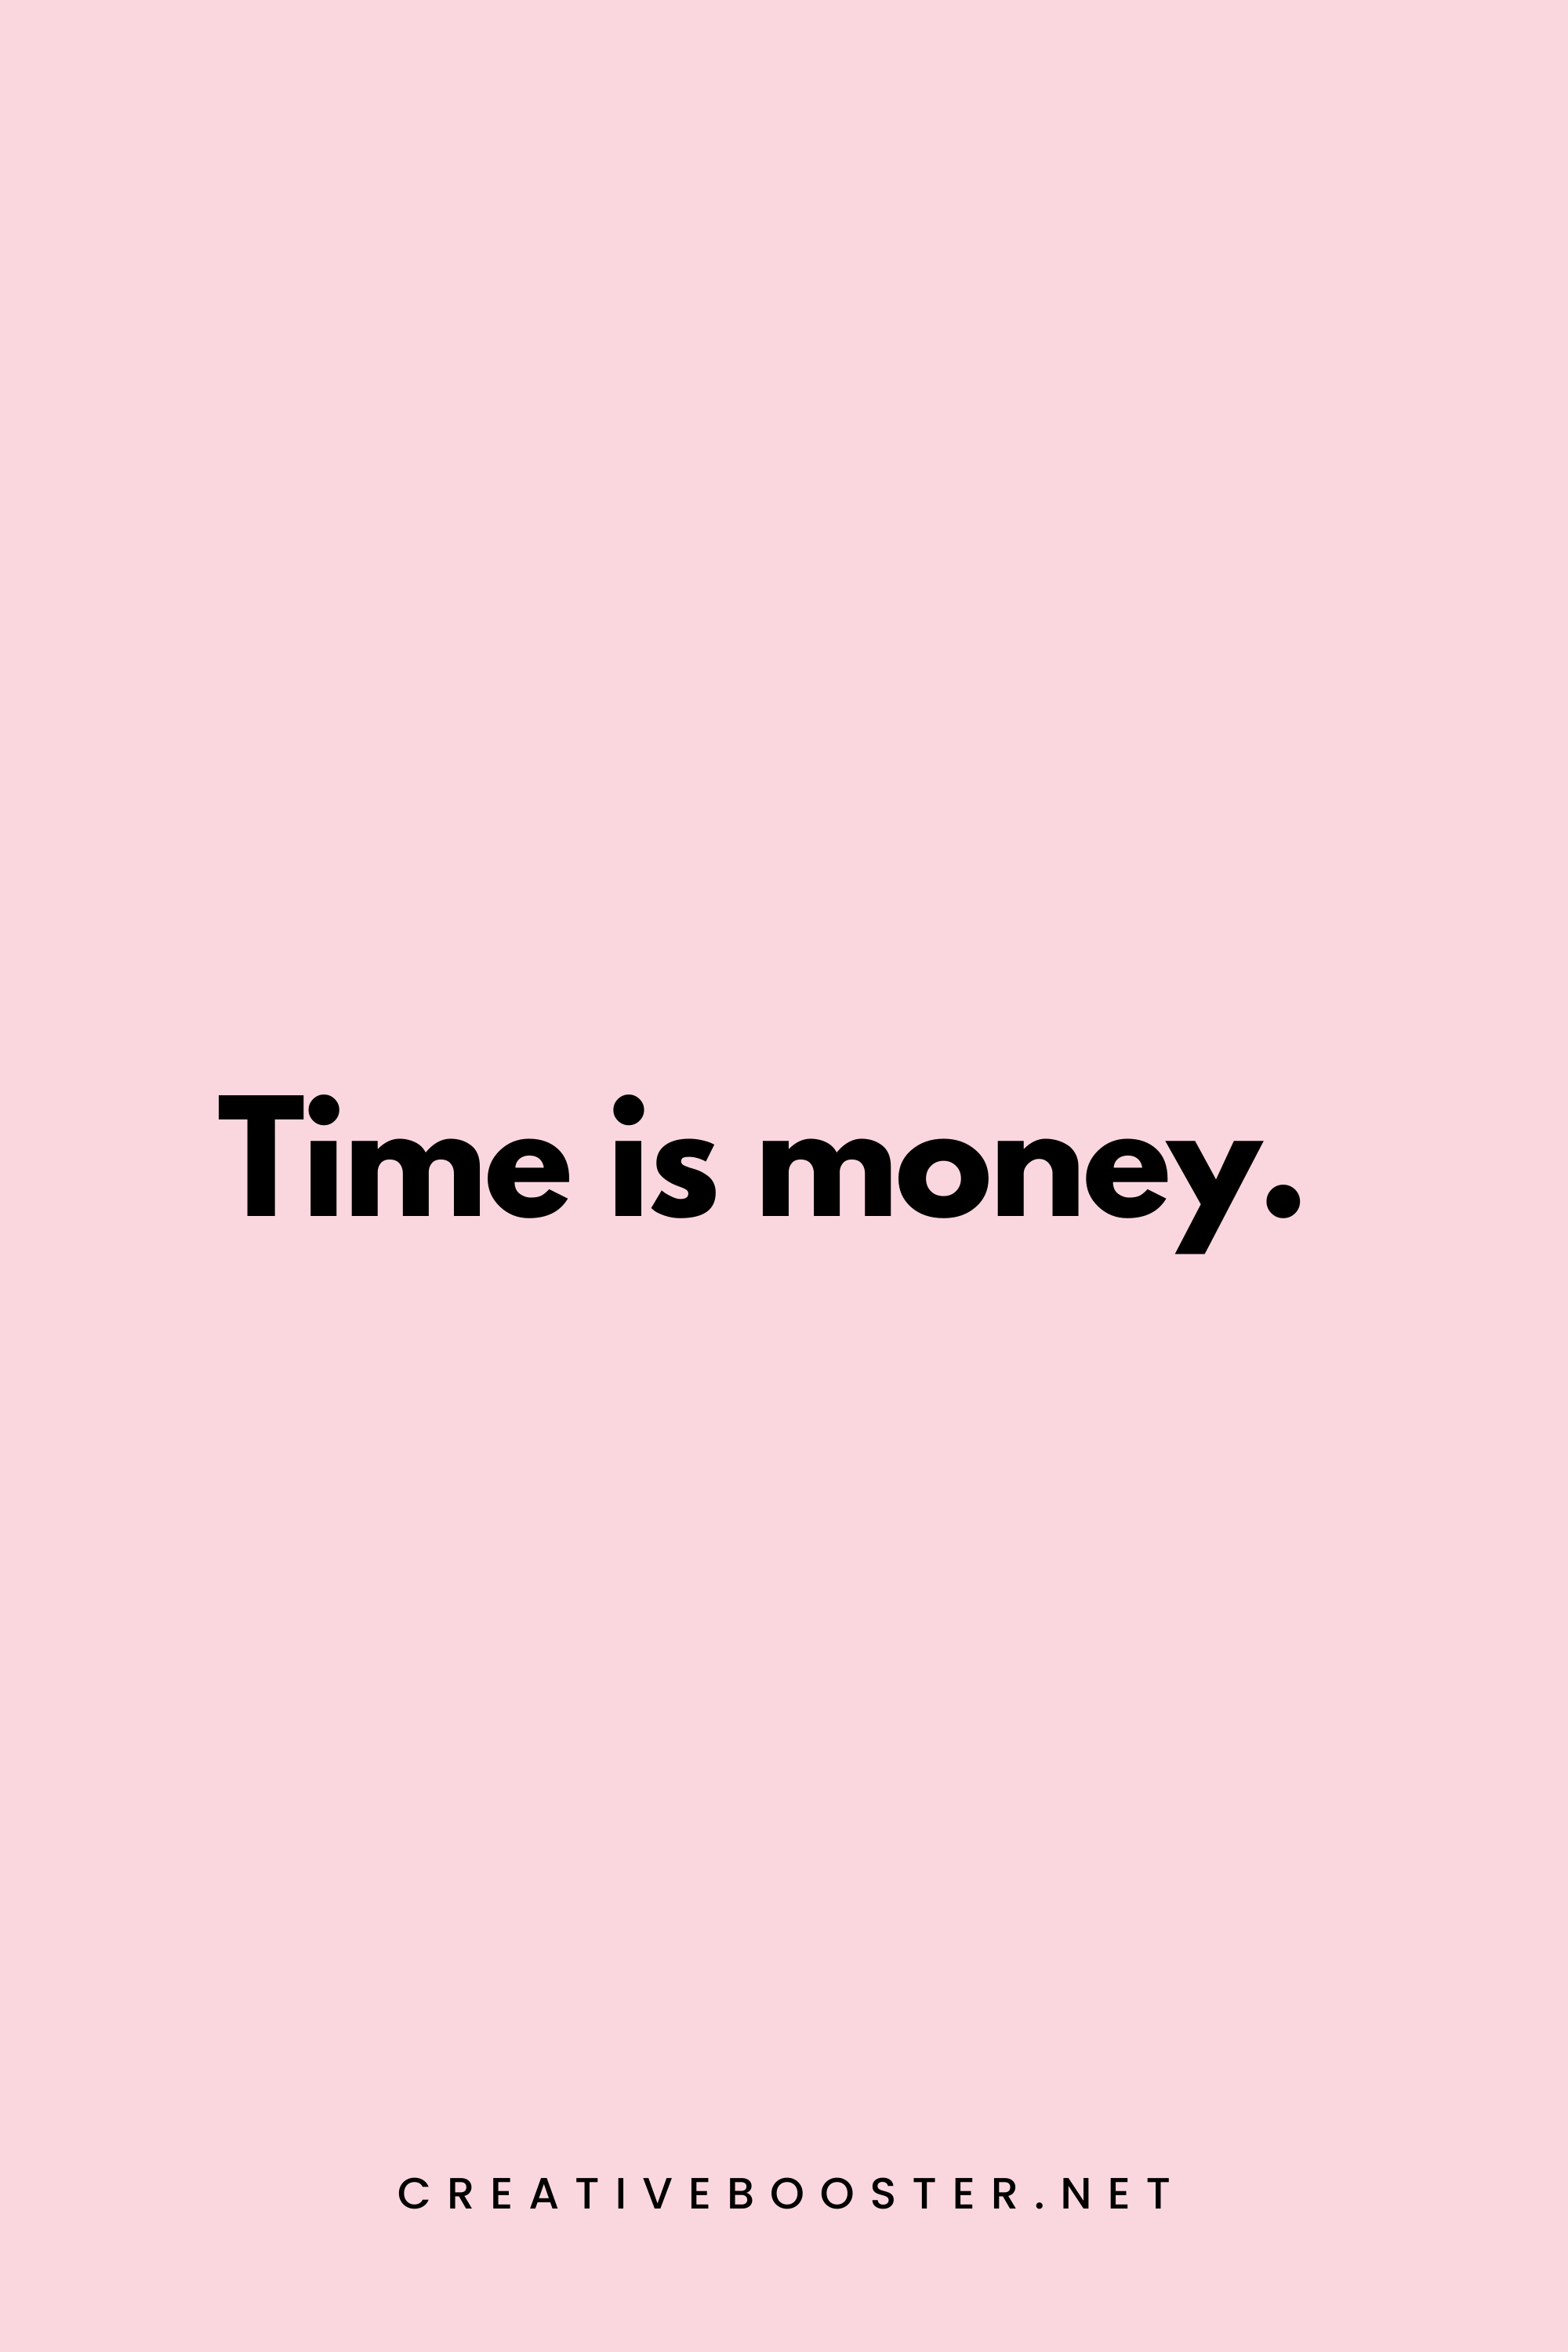 19. Time is money. - Benjamin Franklin - 2. Short Financial Freedom Quotes